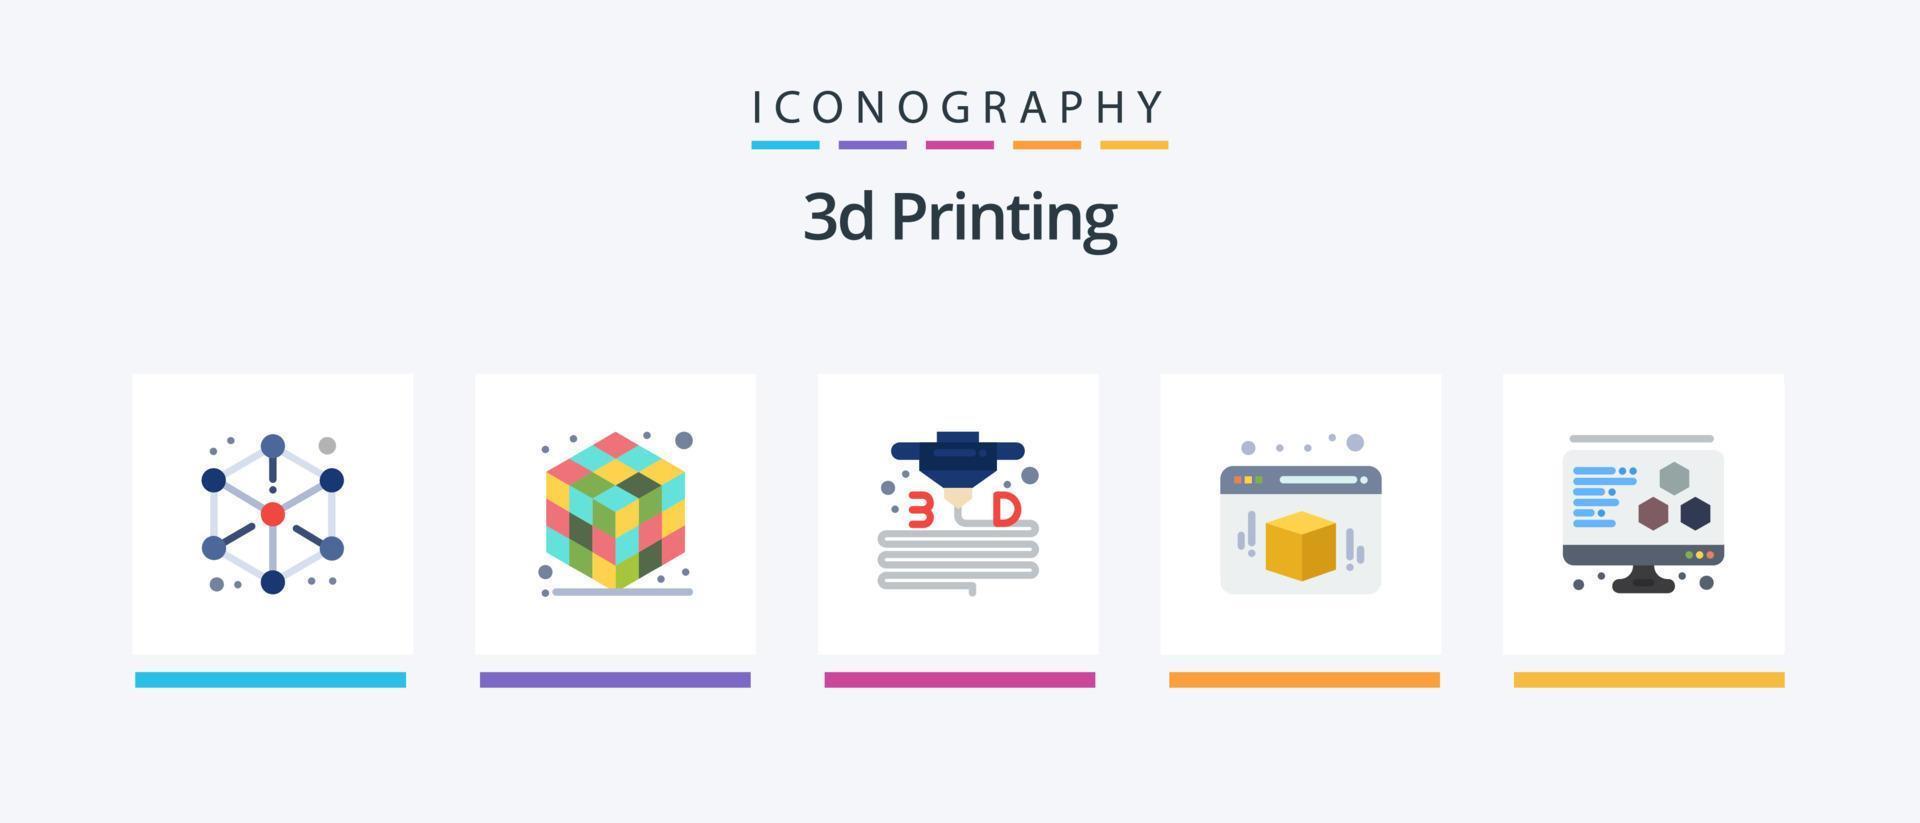 3d Printing Flat 5 Icon Pack Including d. cube. 3d. box. printer. Creative Icons Design vector